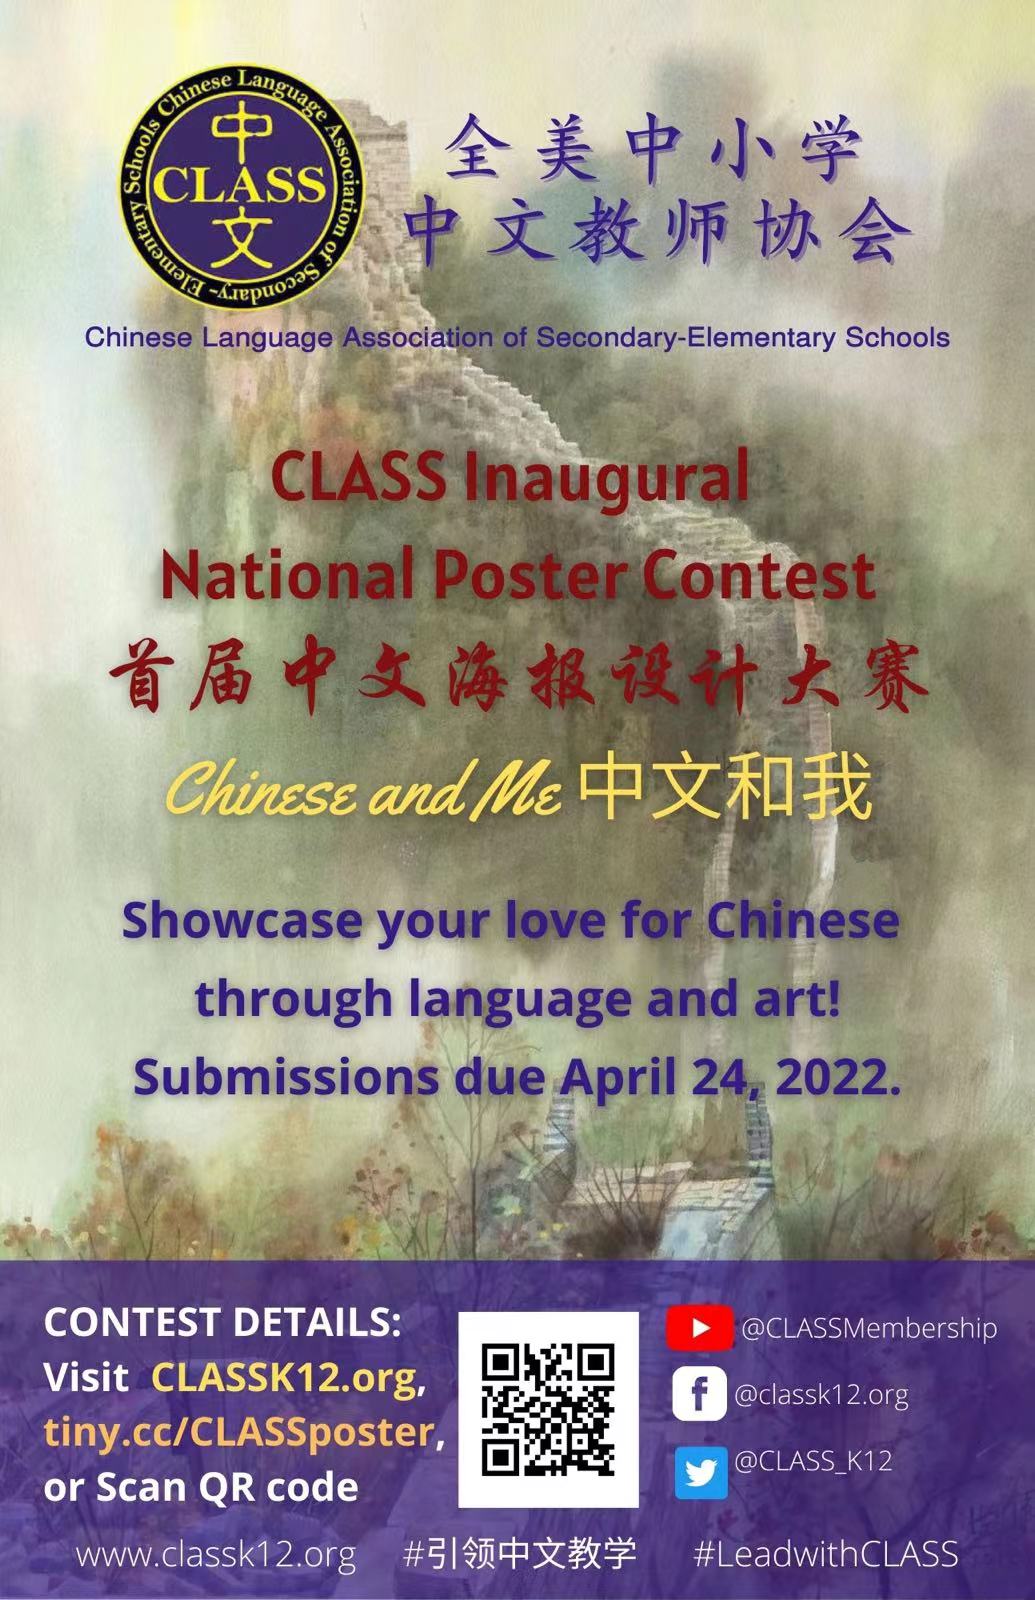 2022 CLASS Poster Contest flyer